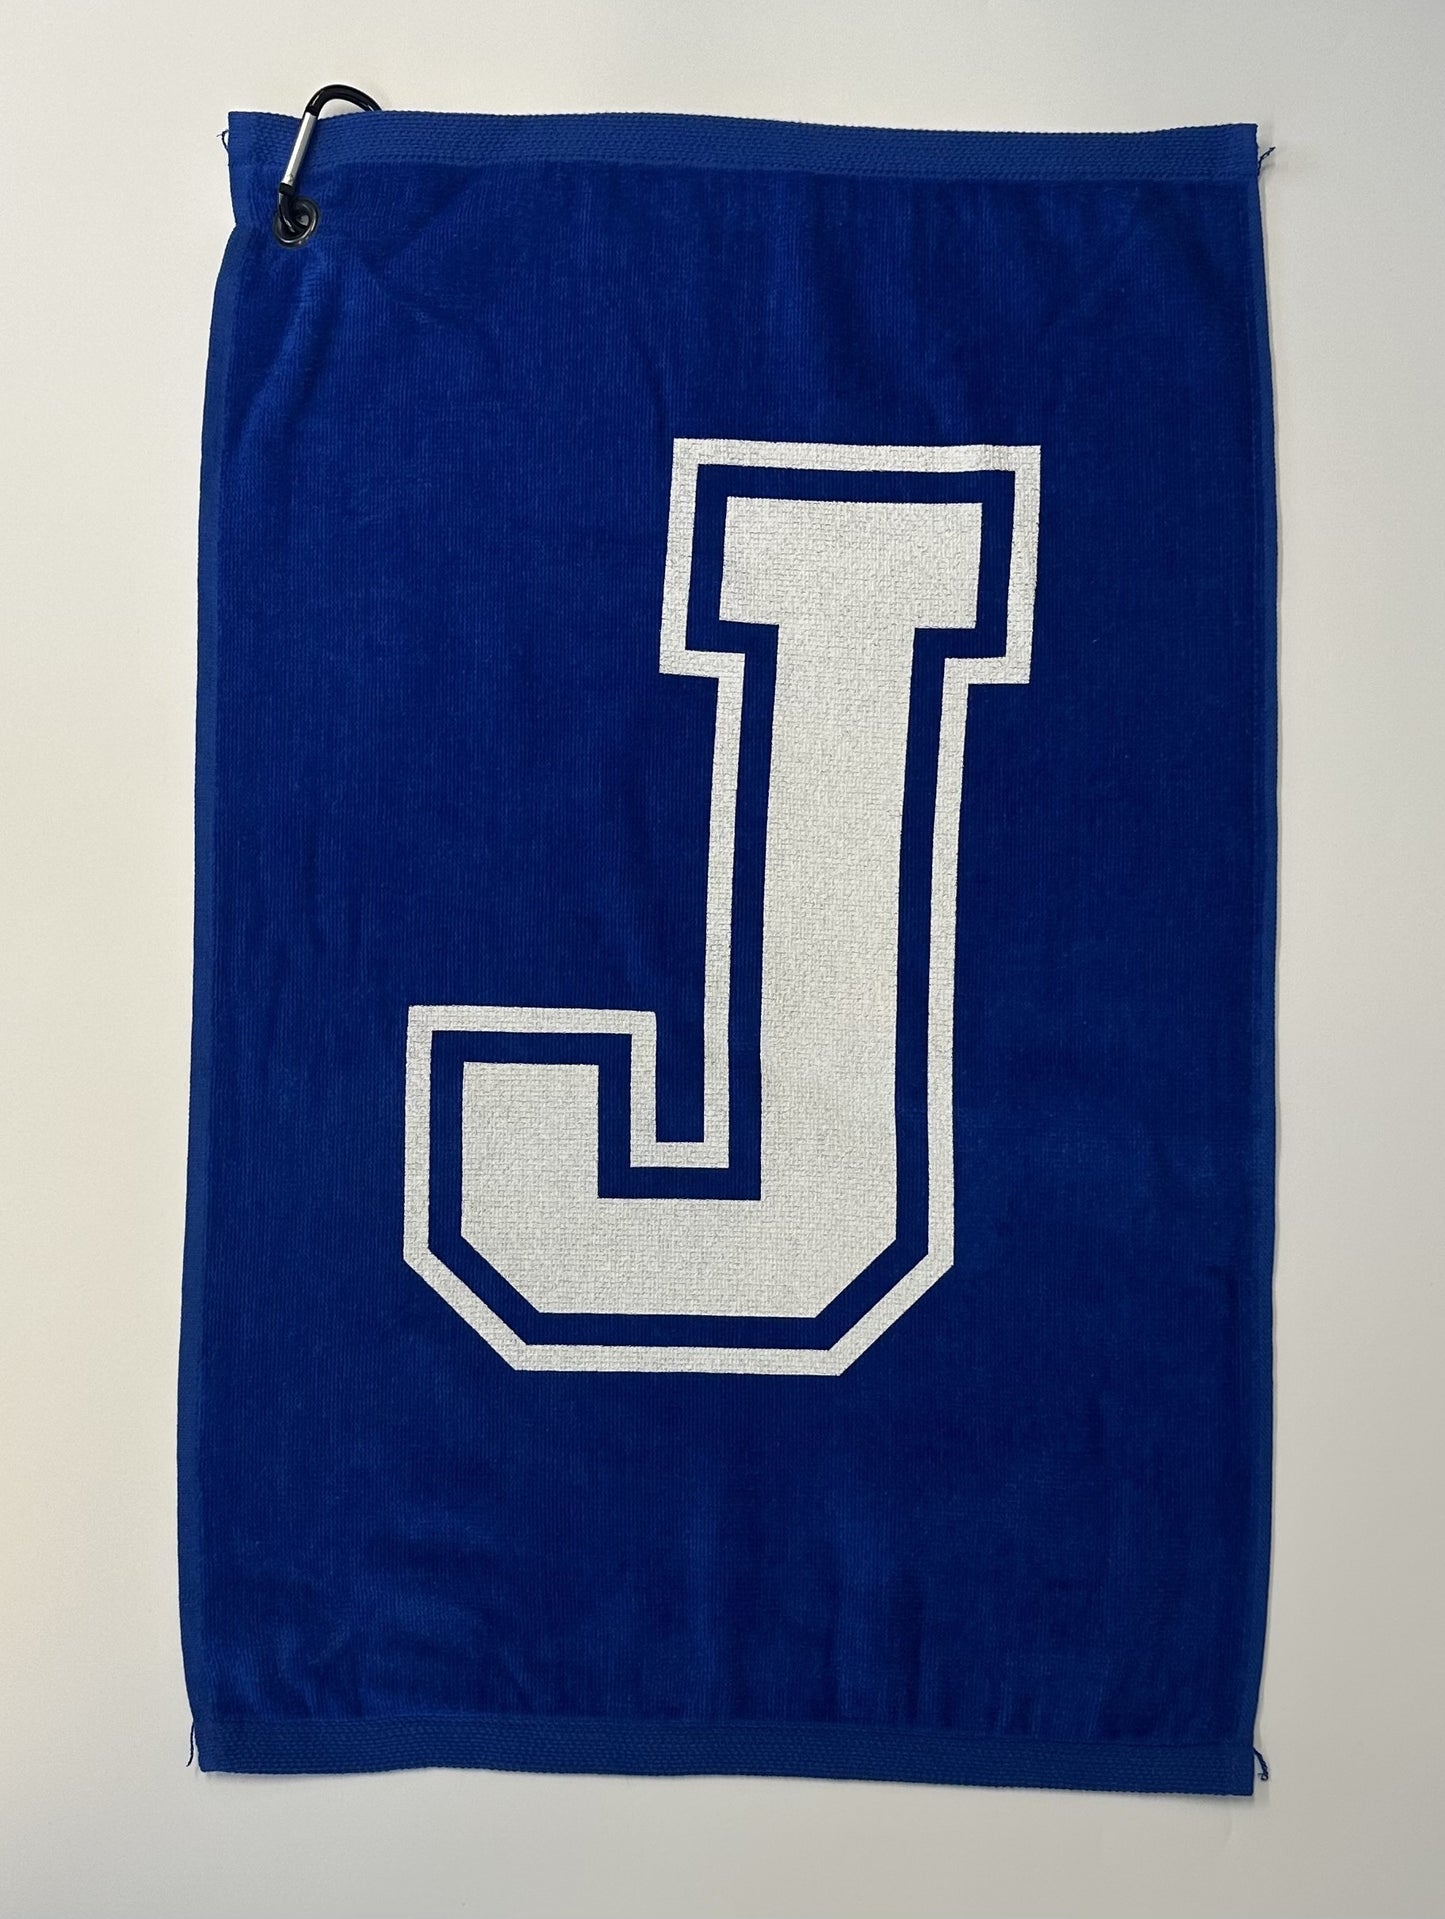 100% Cotton.  Measures 16" width x 24" length.  Solid Royal Blue with J logo.  Attached clip makes it easy to keep your towel within reach throughout your game.